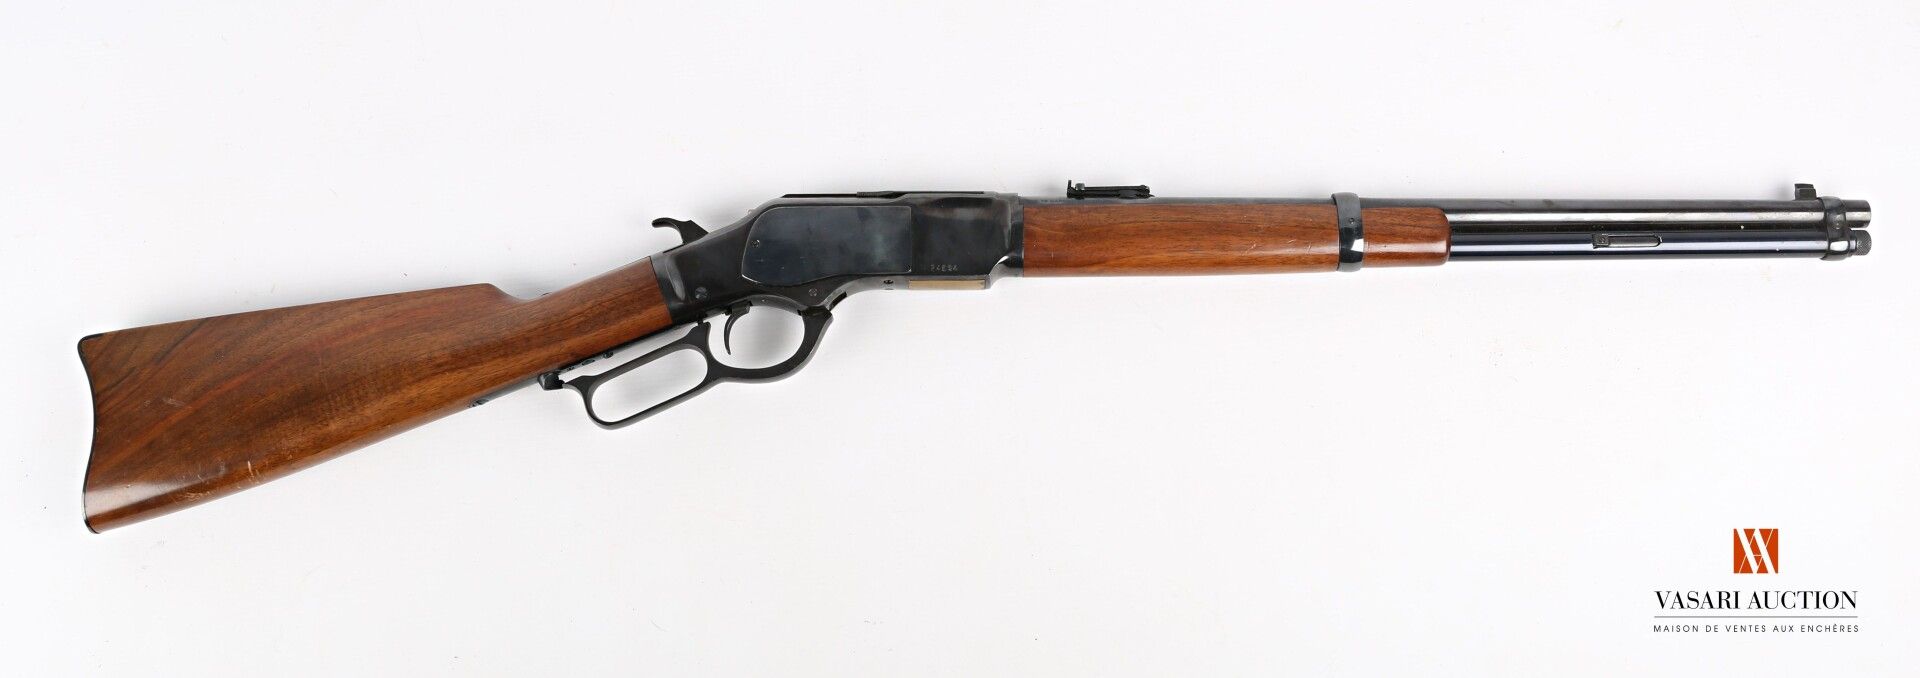 Null Navy Arms Co. Ridgefield N.J. Type Winchester Carbine 73 caliber 22 long ri&hellip;